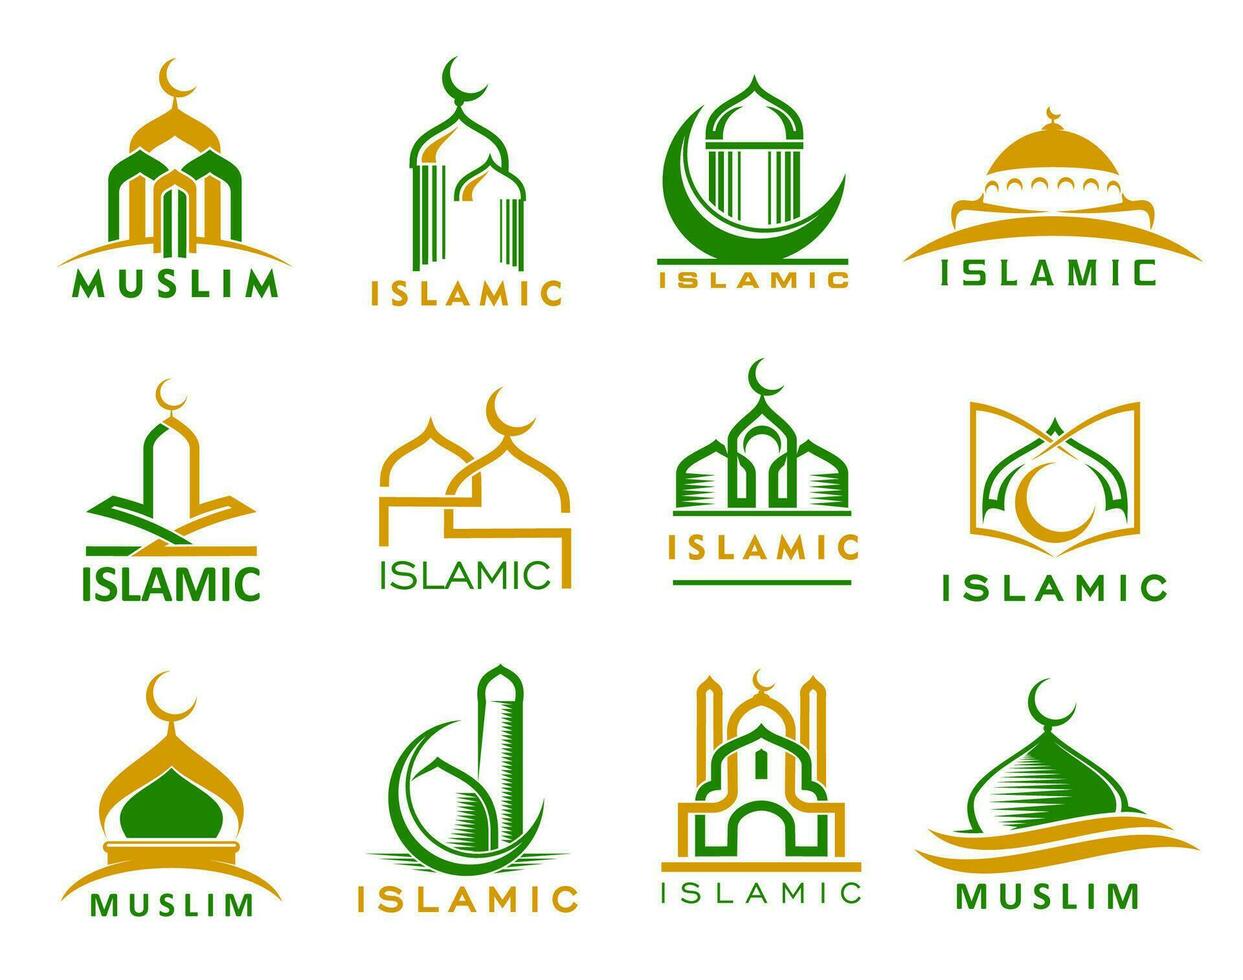 Muslim mosque, Islam religion and Quran icons vector